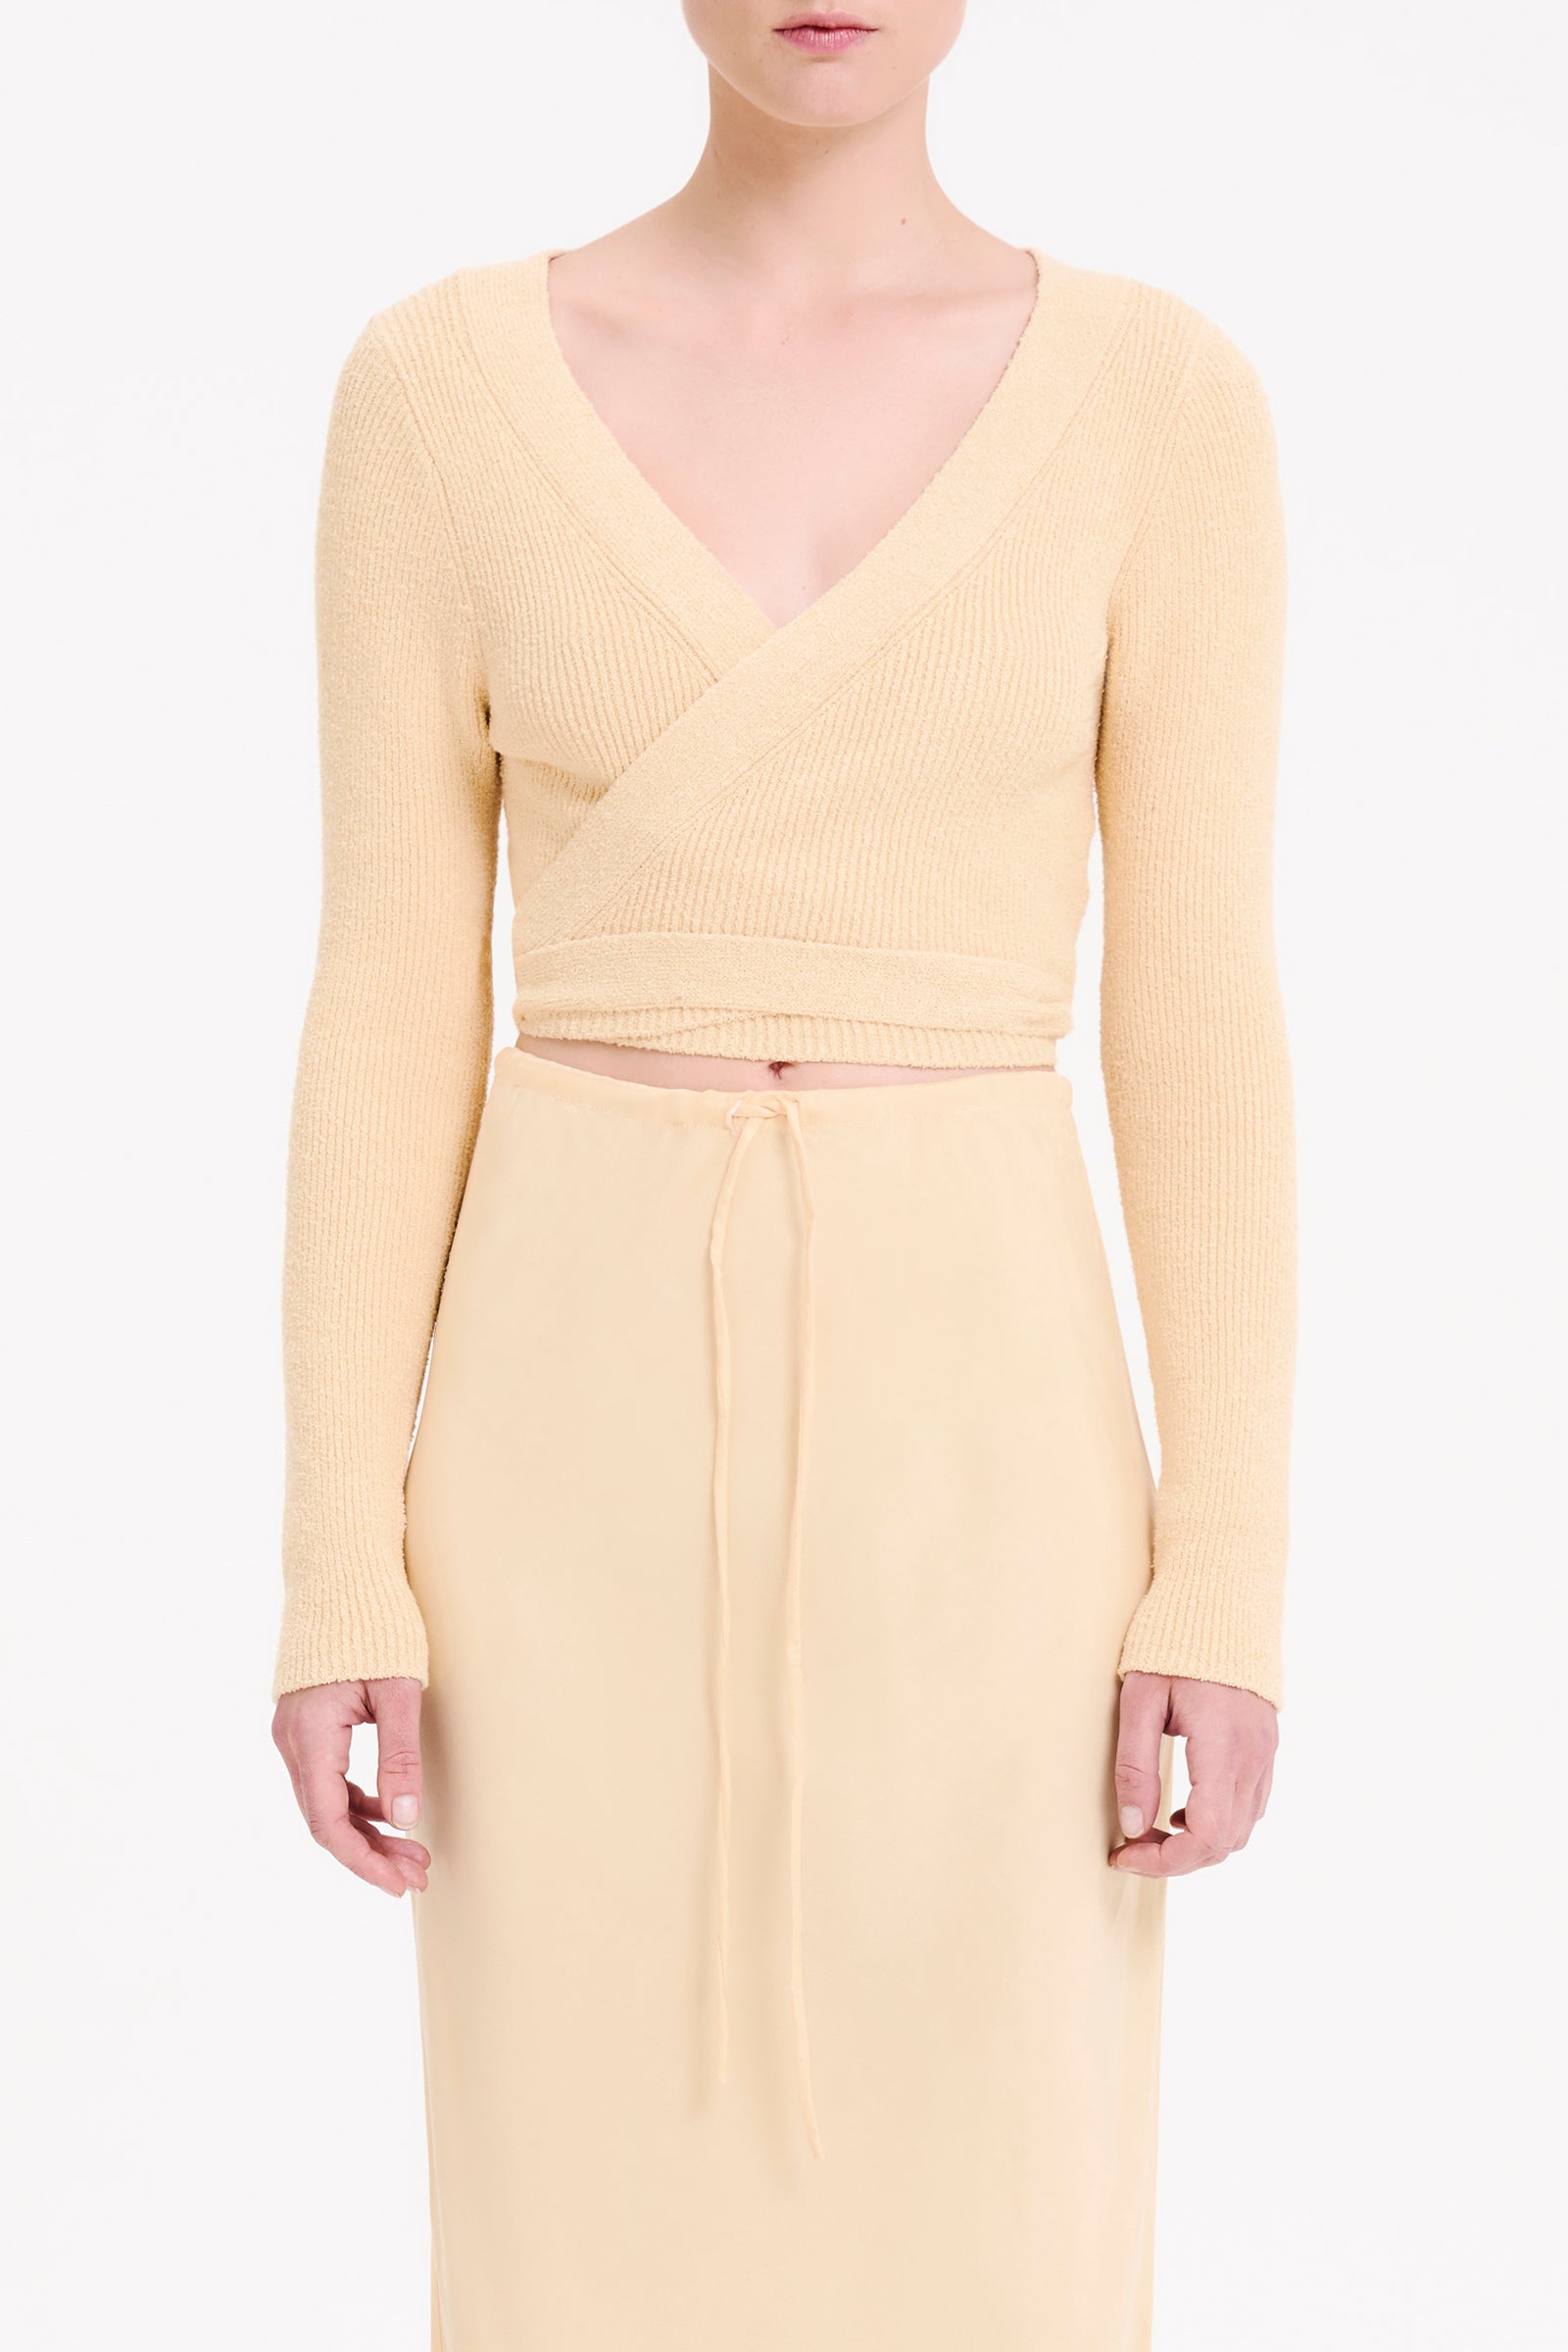 Nude Lucy Astro Knit Wrap Top in a Yellow Straw Colour